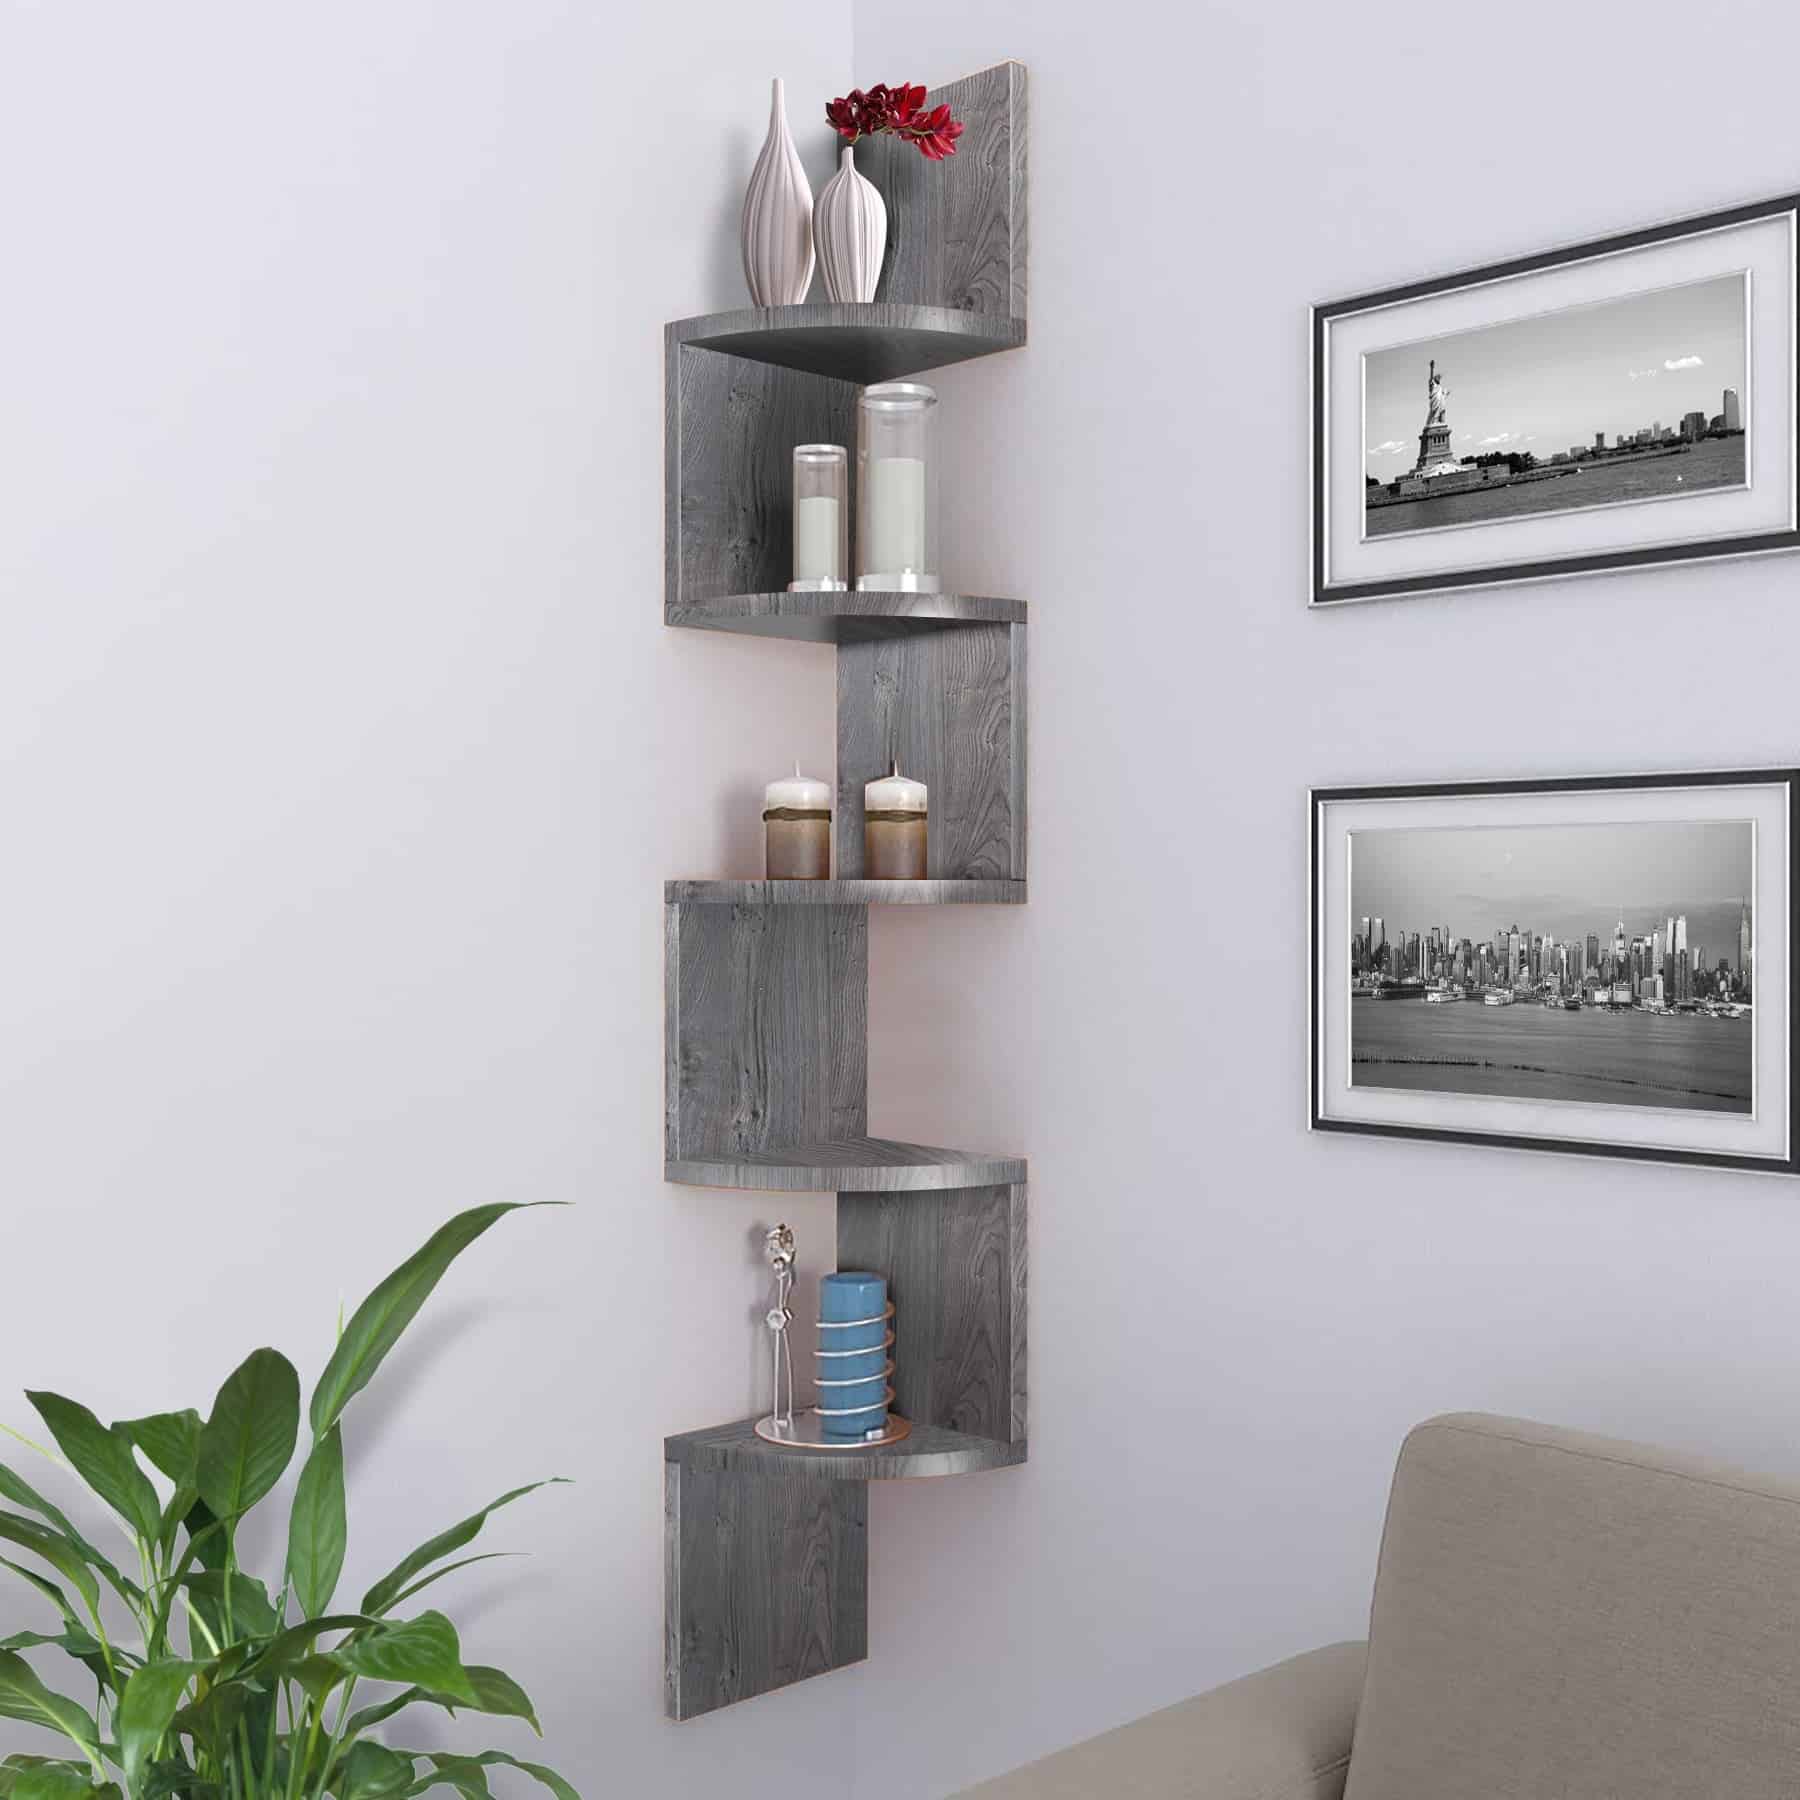 Corner Shelving Units Are Perfect for Small Spaces